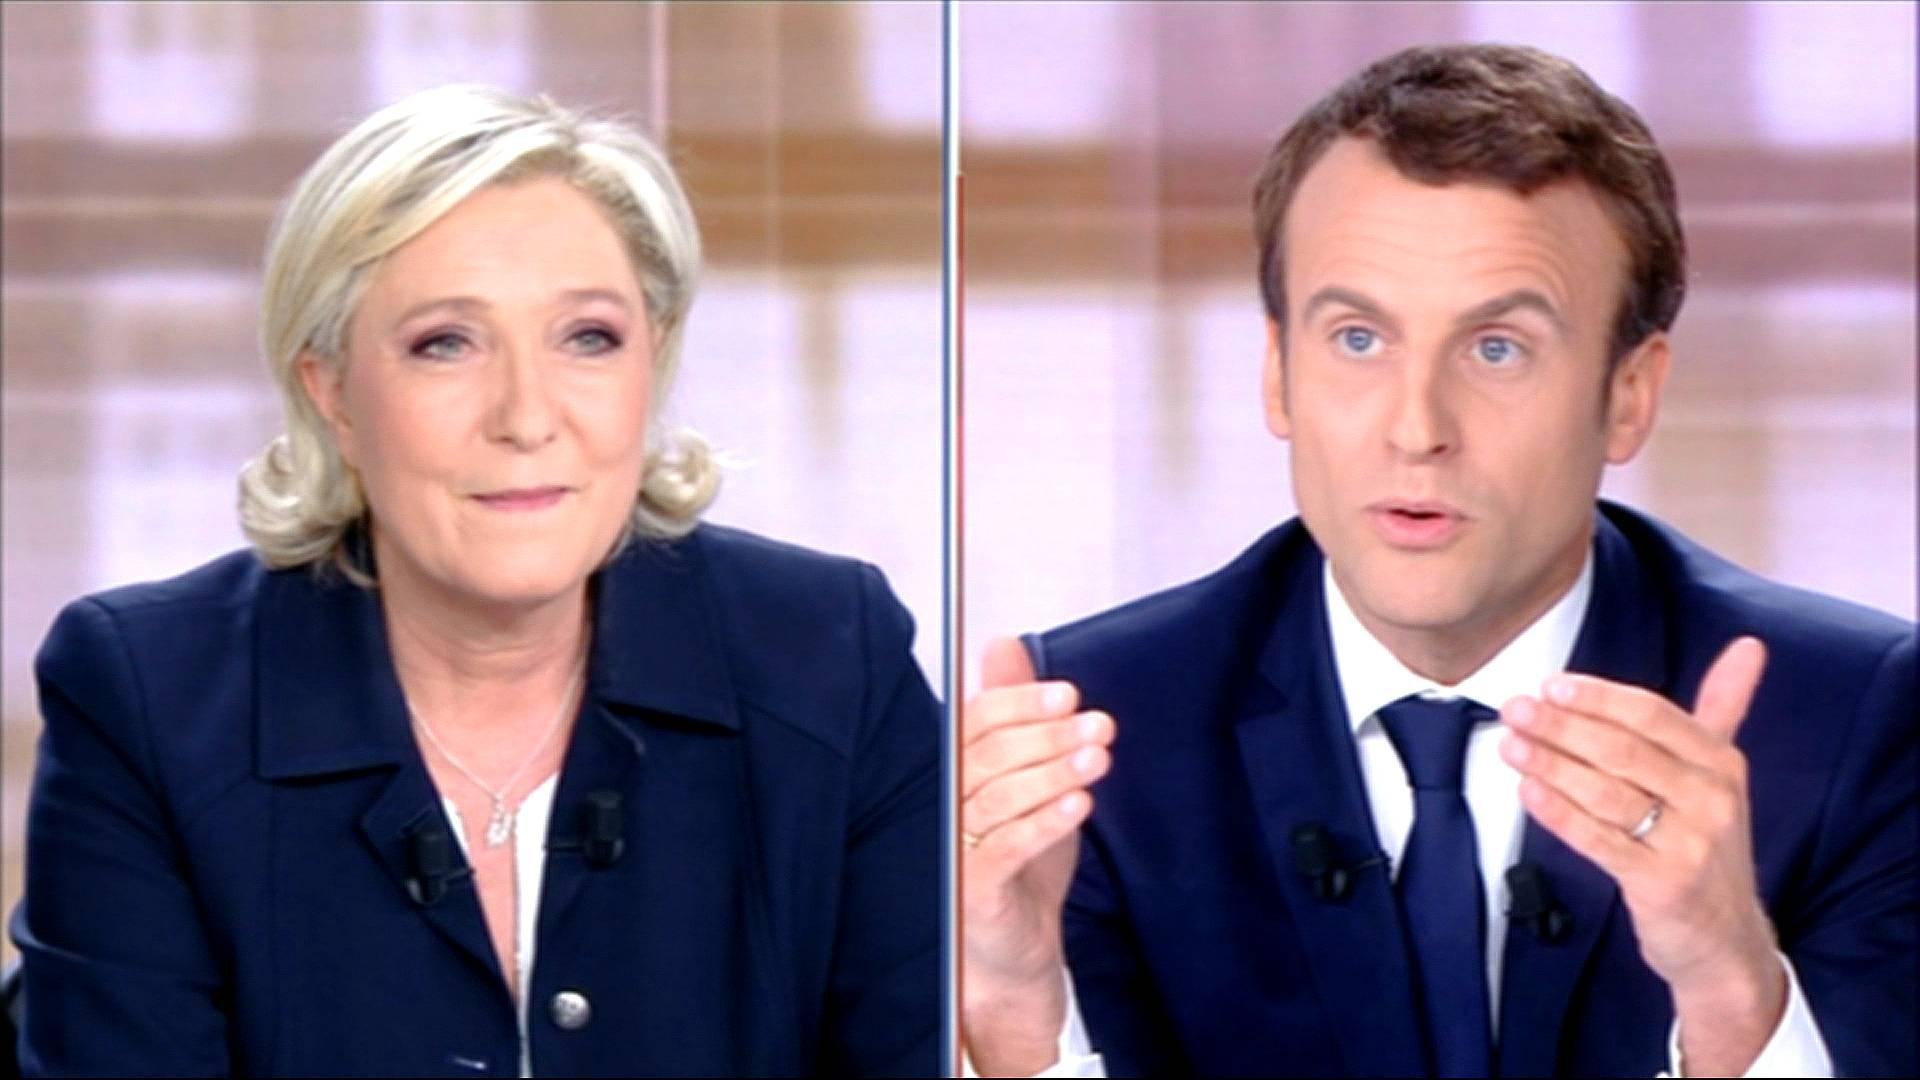 French election: Le Pen, Macron clash in heated debate - video Dailymotion